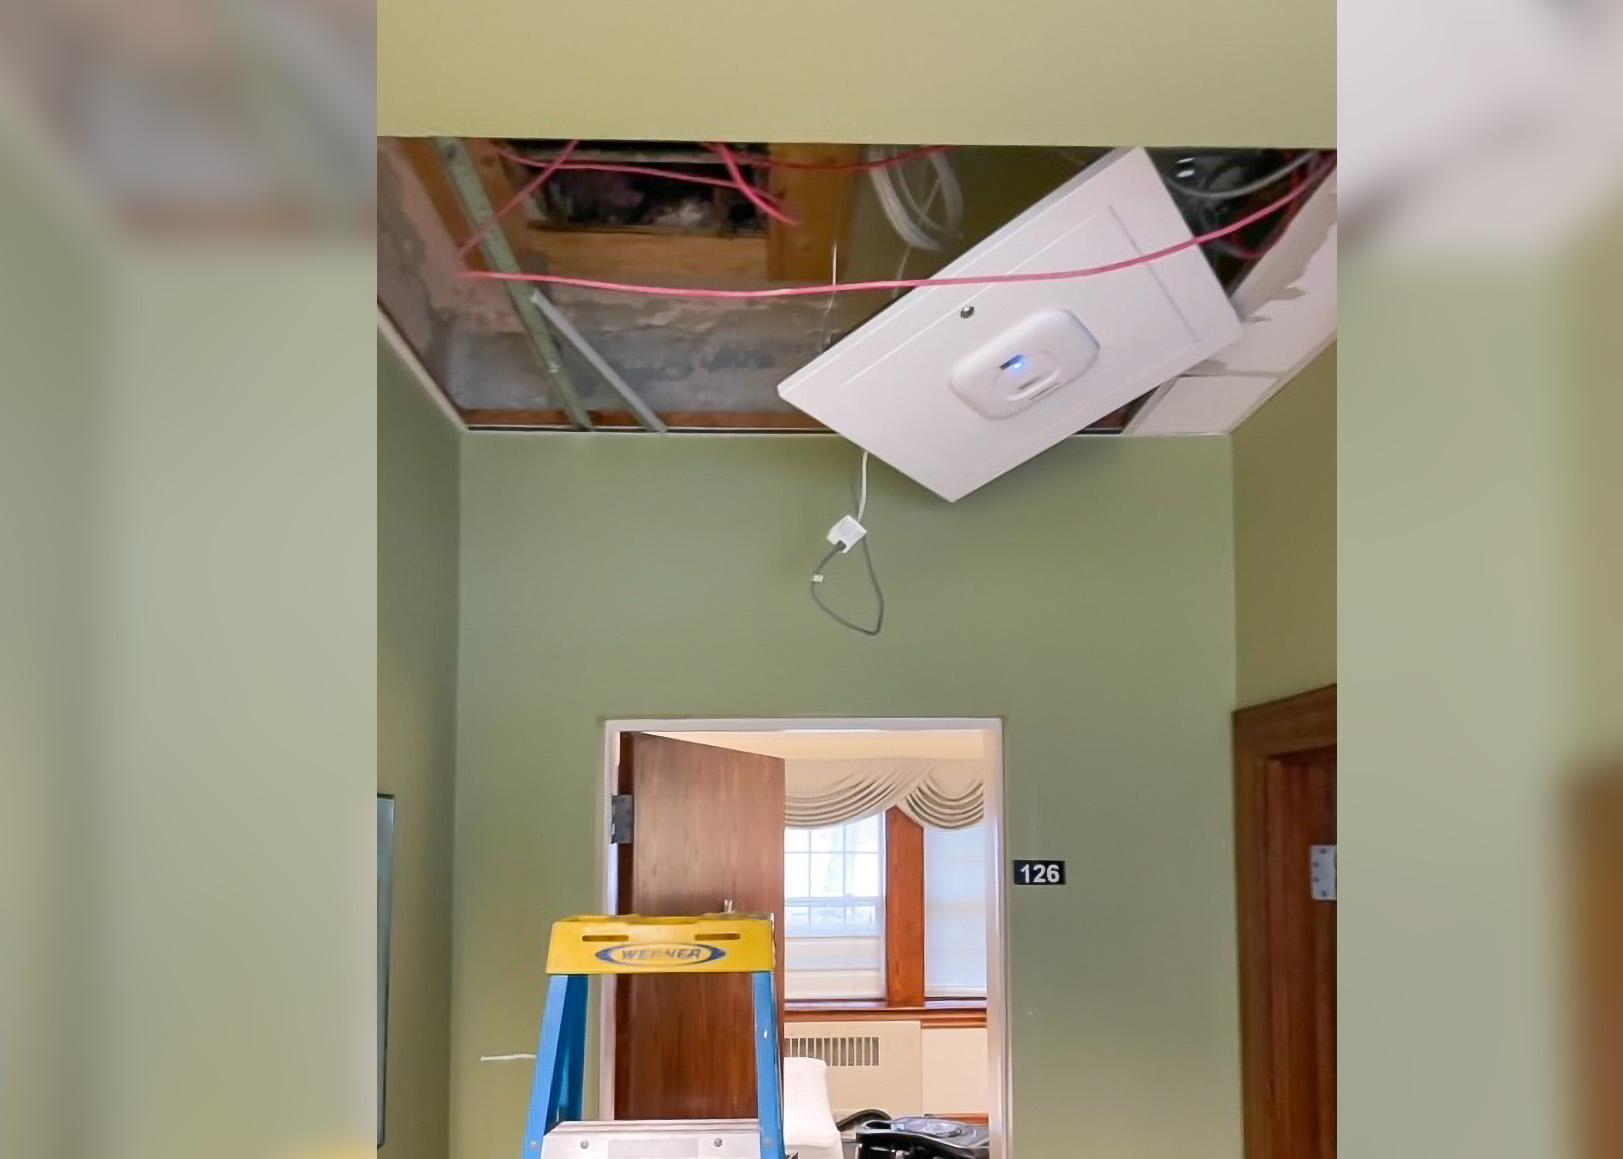 An air conditioning unit is hanging from the ceiling in a room.